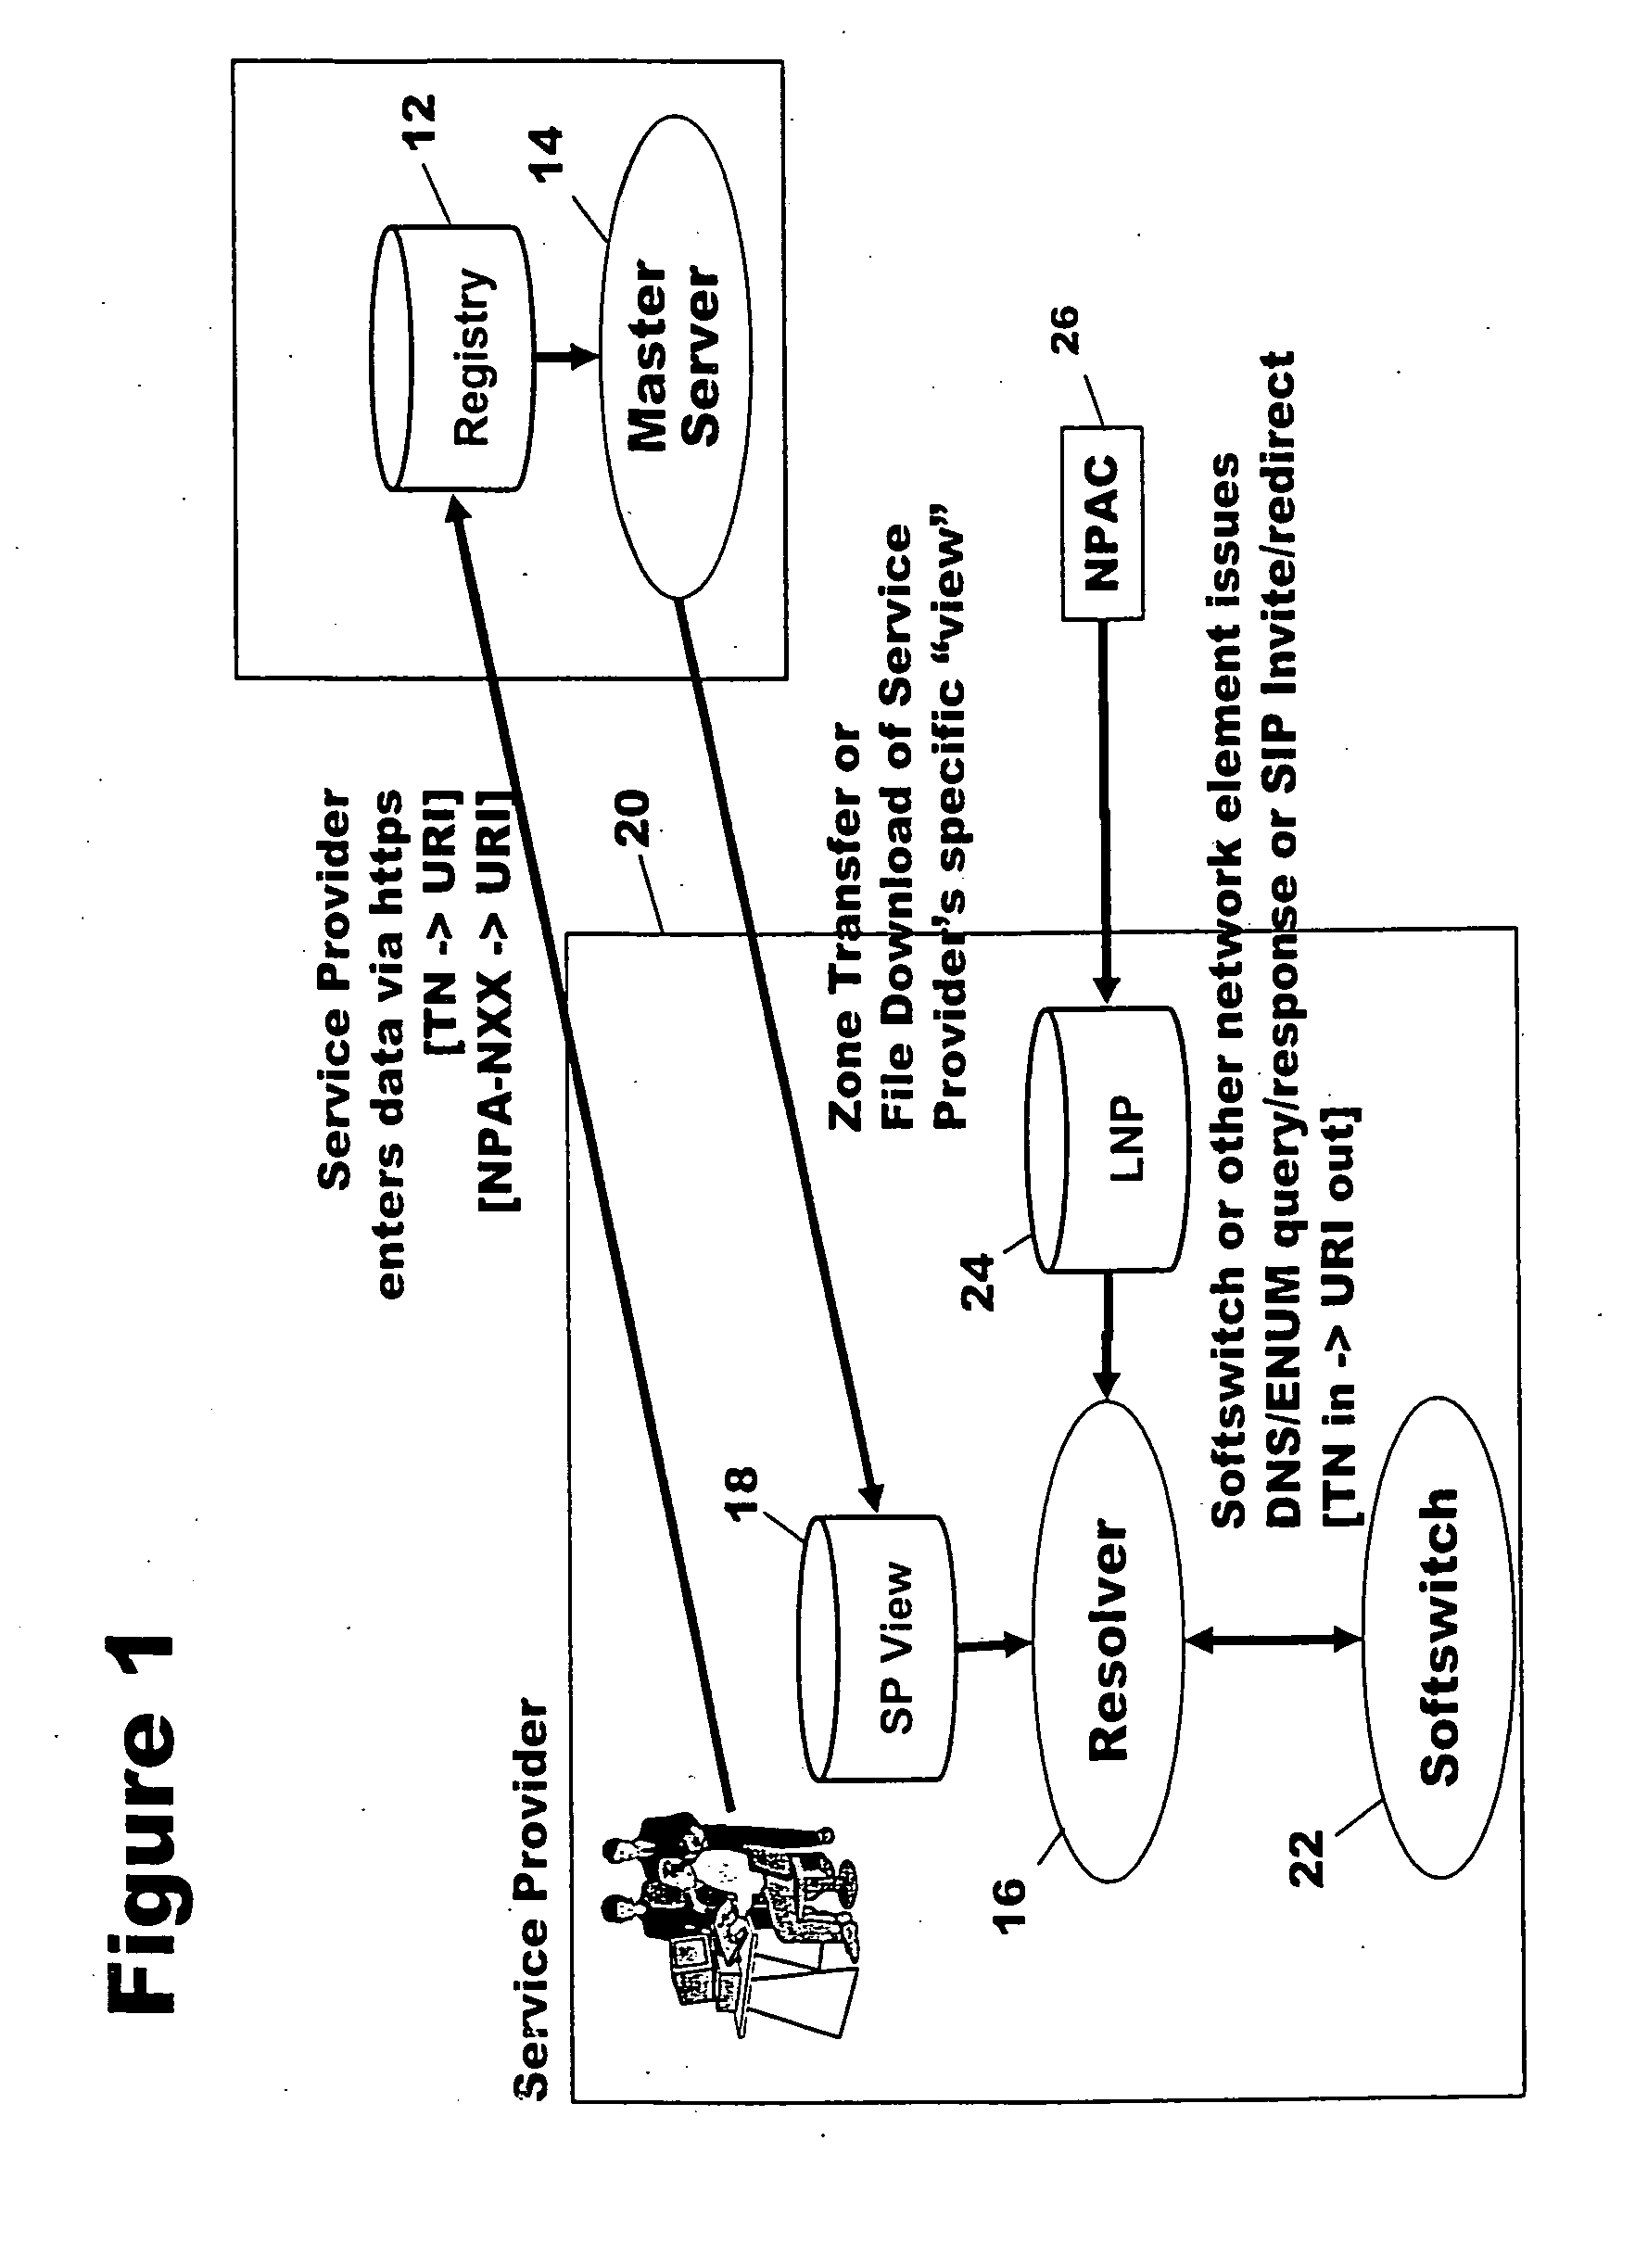 Method and system for creating VoIP routing registry